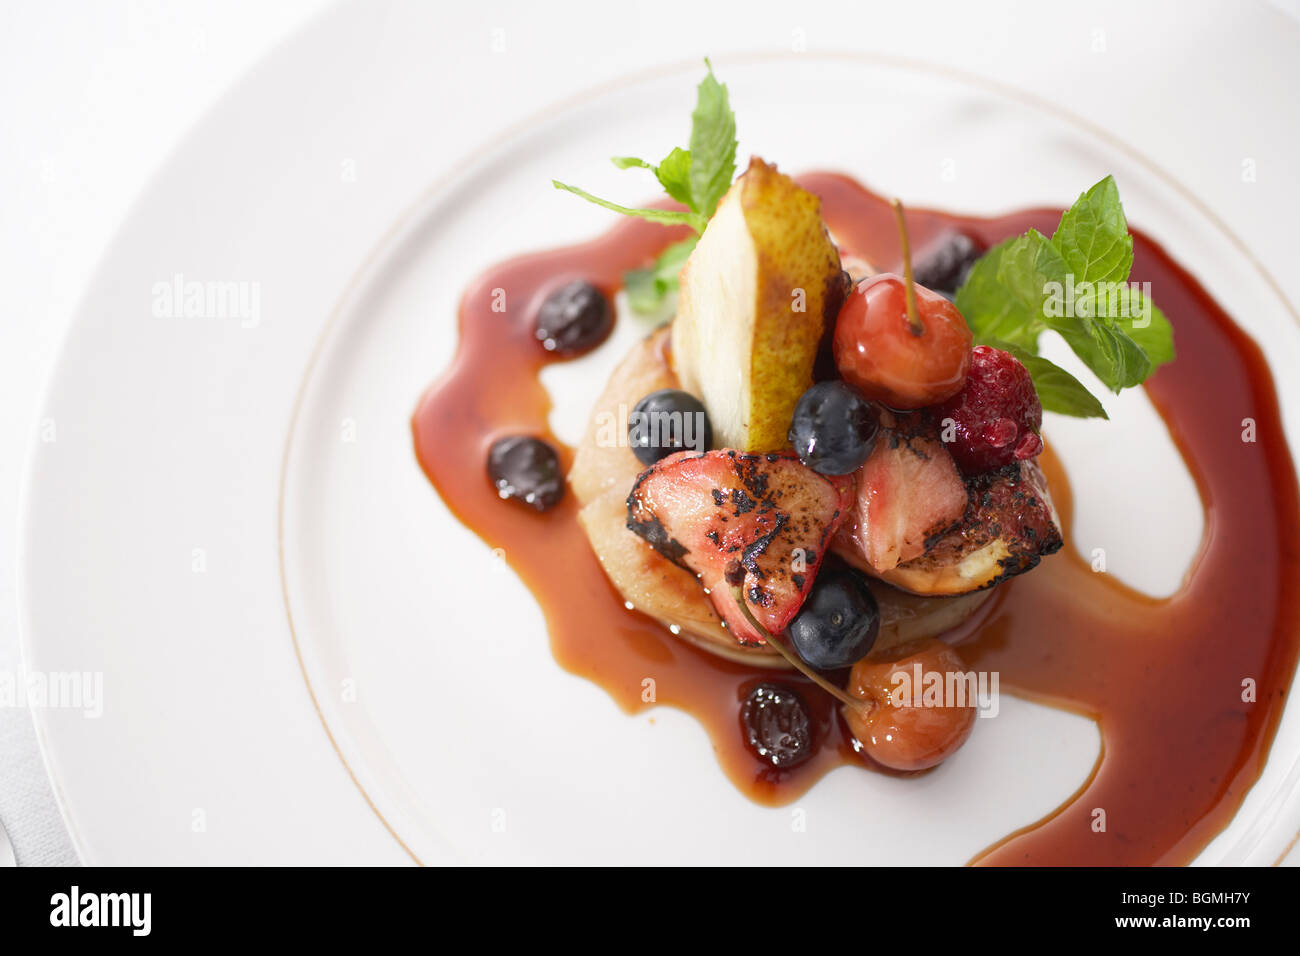 Oven roasted fruit with berry compote Stock Photo